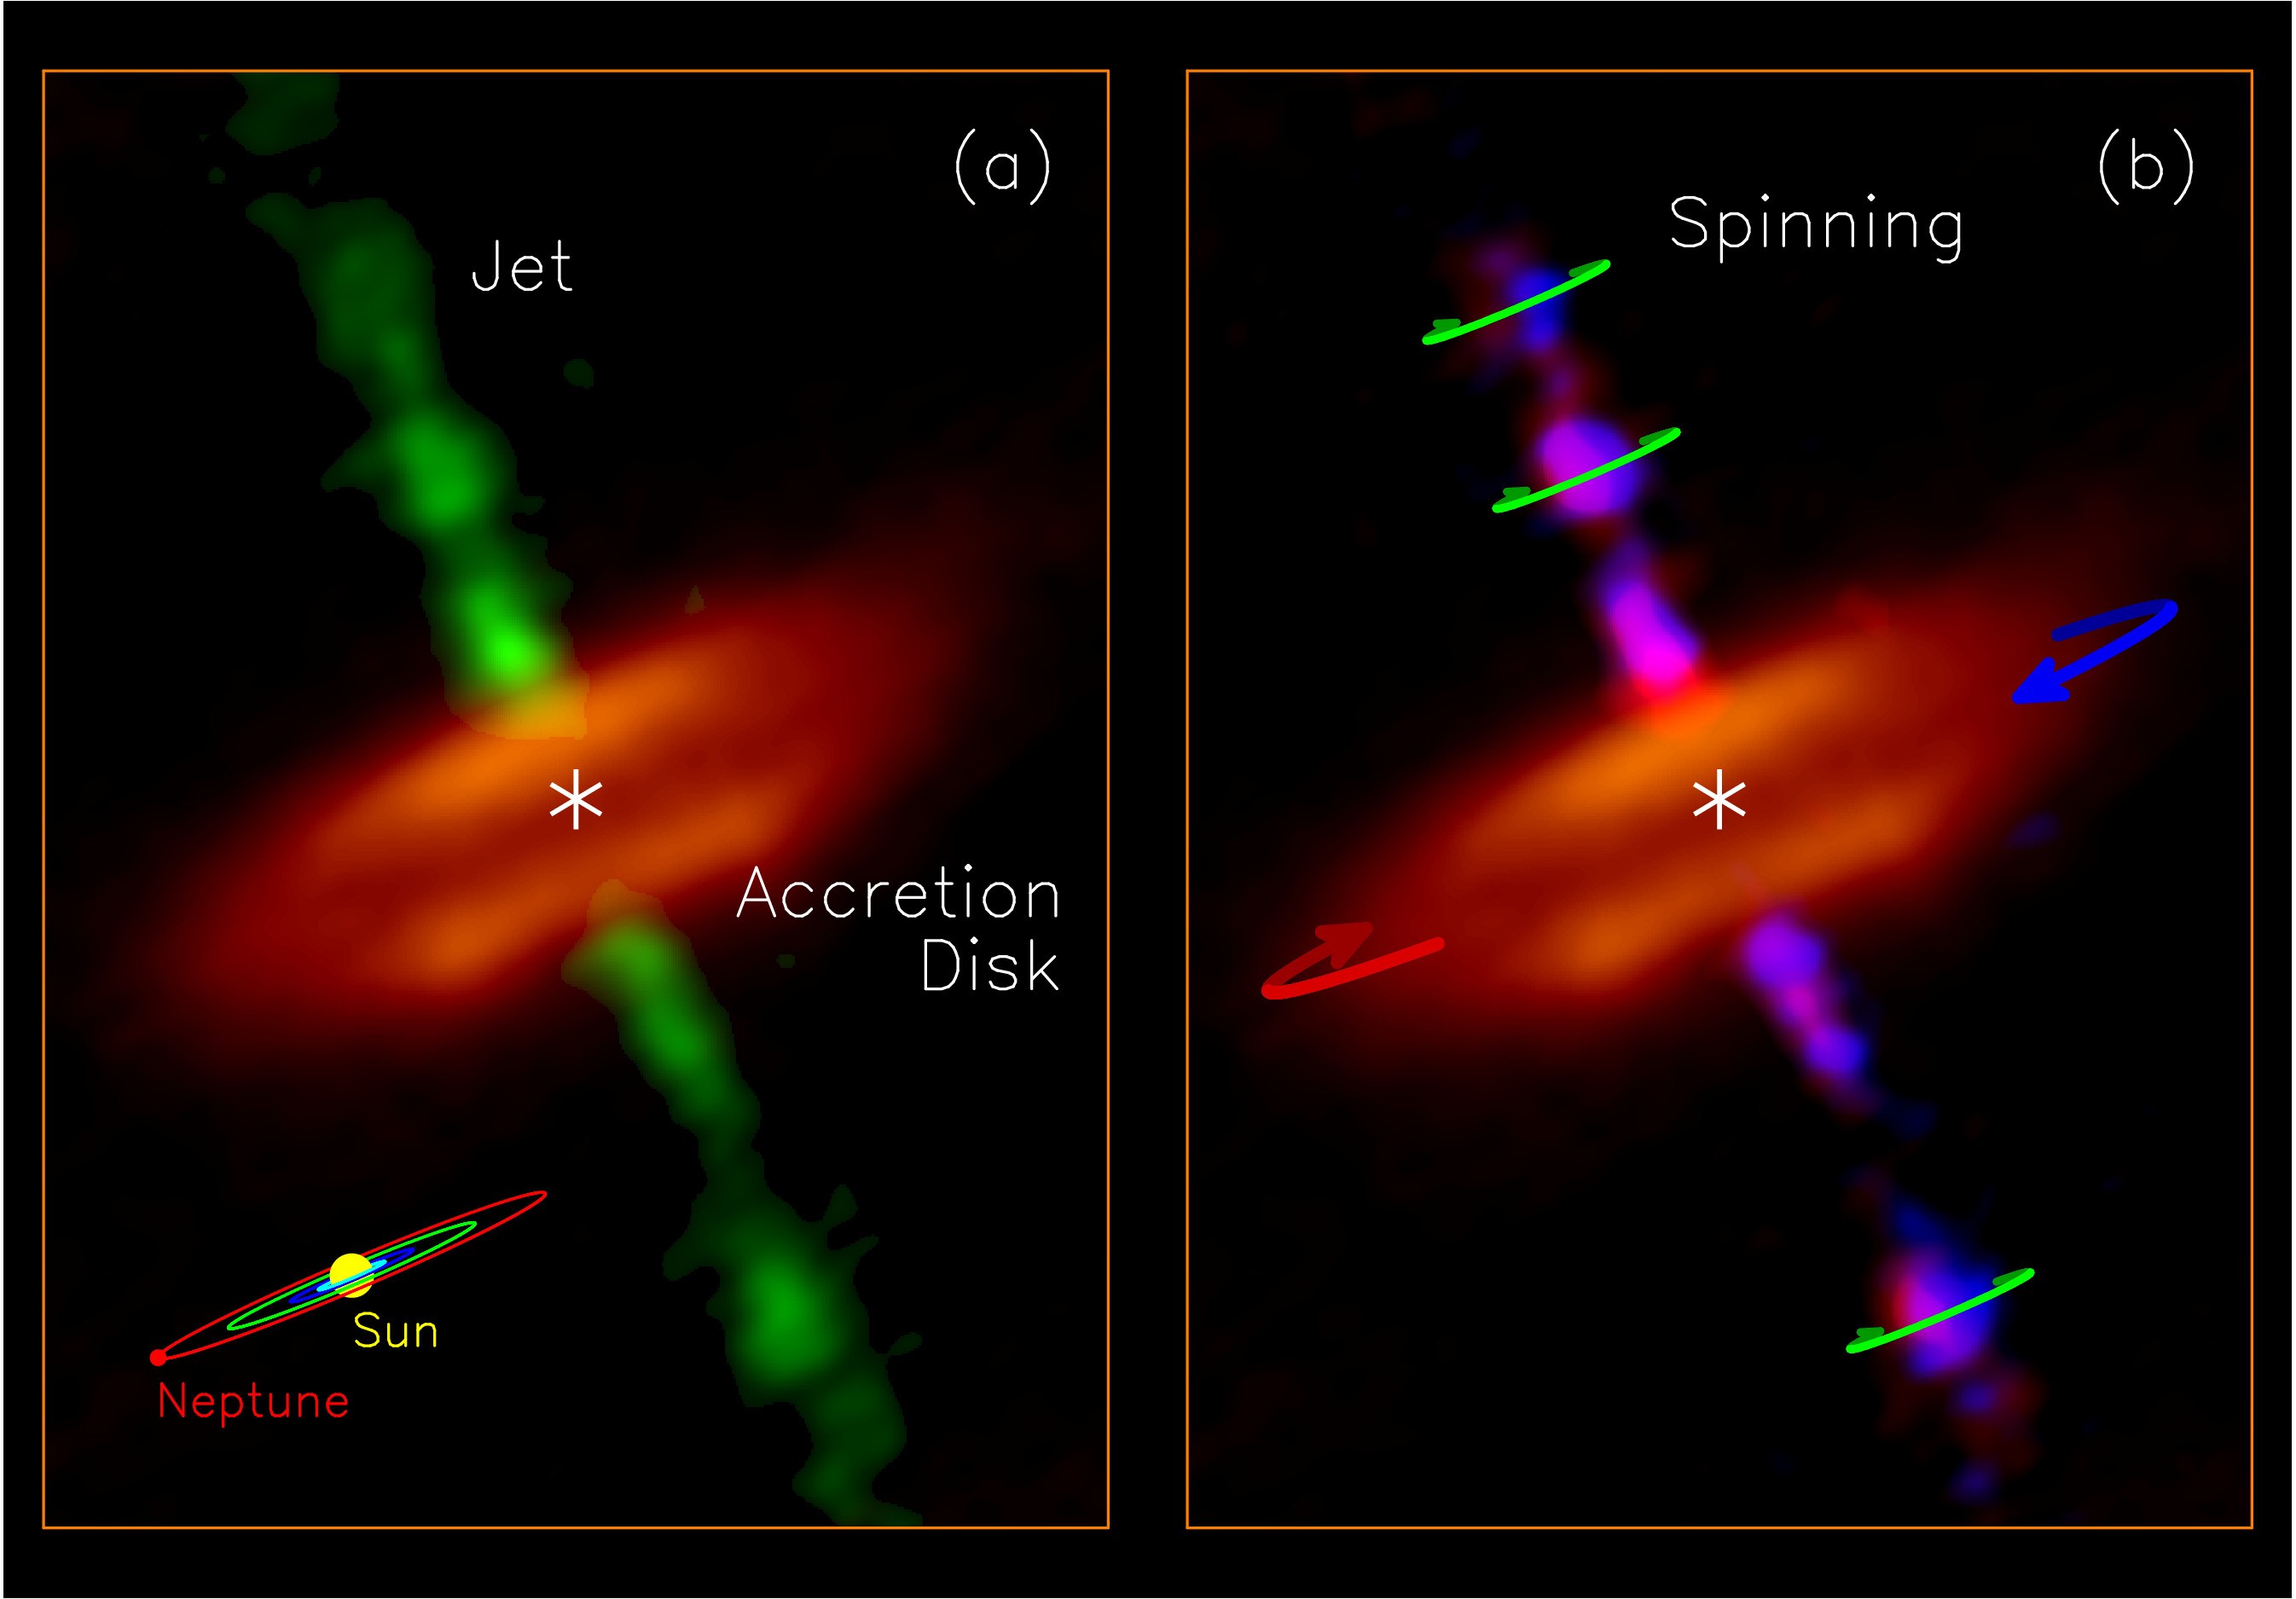 Figure 1. Accretion disk (orange) and Spinning Jet (green in left panel and blue+red images in right panel) detected in the HH 212 star-forming system. Credit: ALMA (ESO/NAOJ/NRAO)/Lee et al.